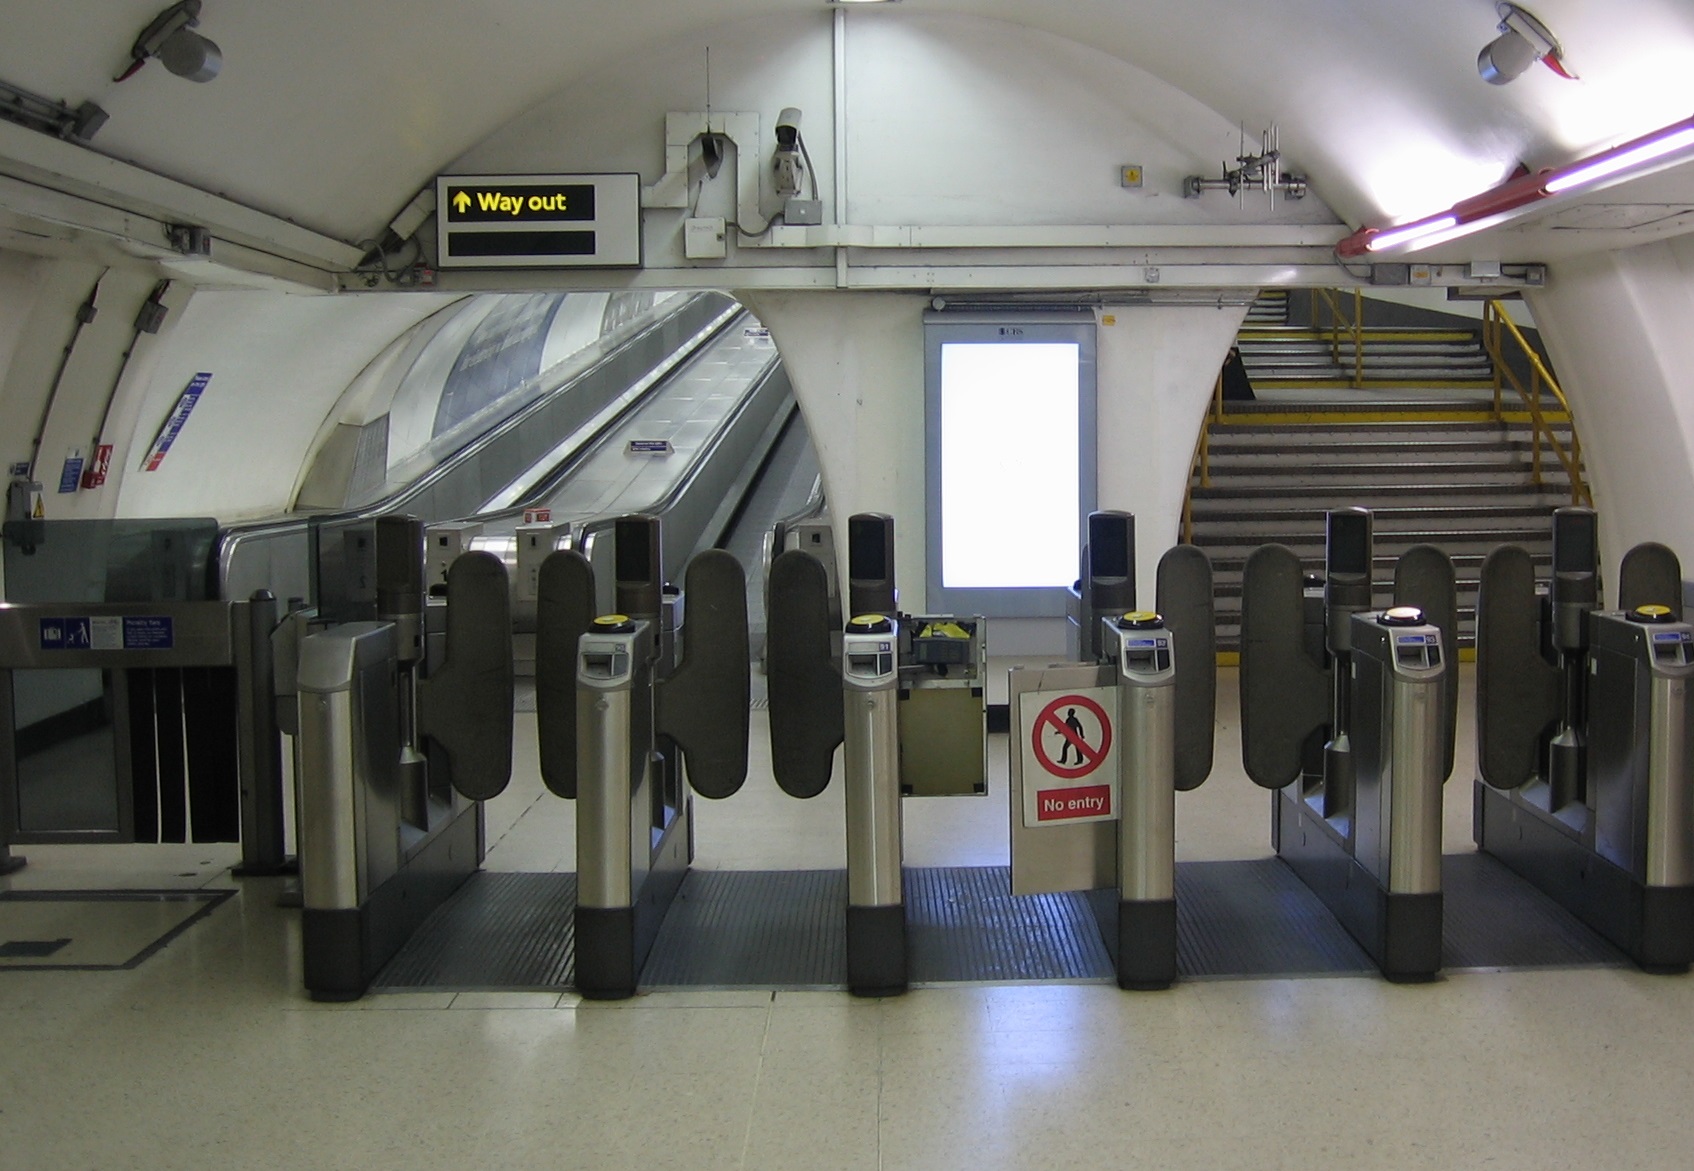 Image of exit from a station to illustrate concept of 'moving on'.